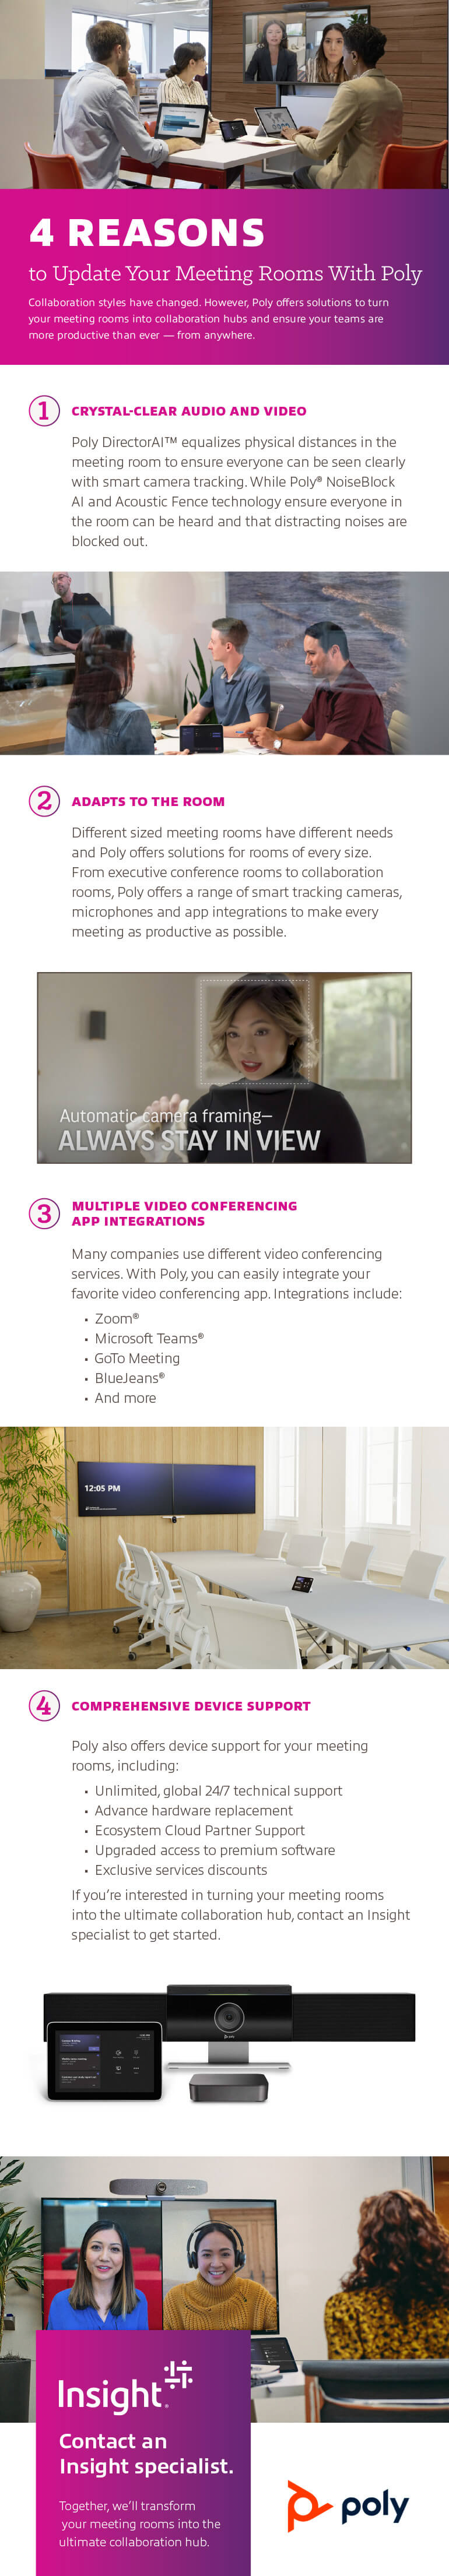 Infographic for 4 Reasons to Update Your Meeting Rooms With Poly as described below